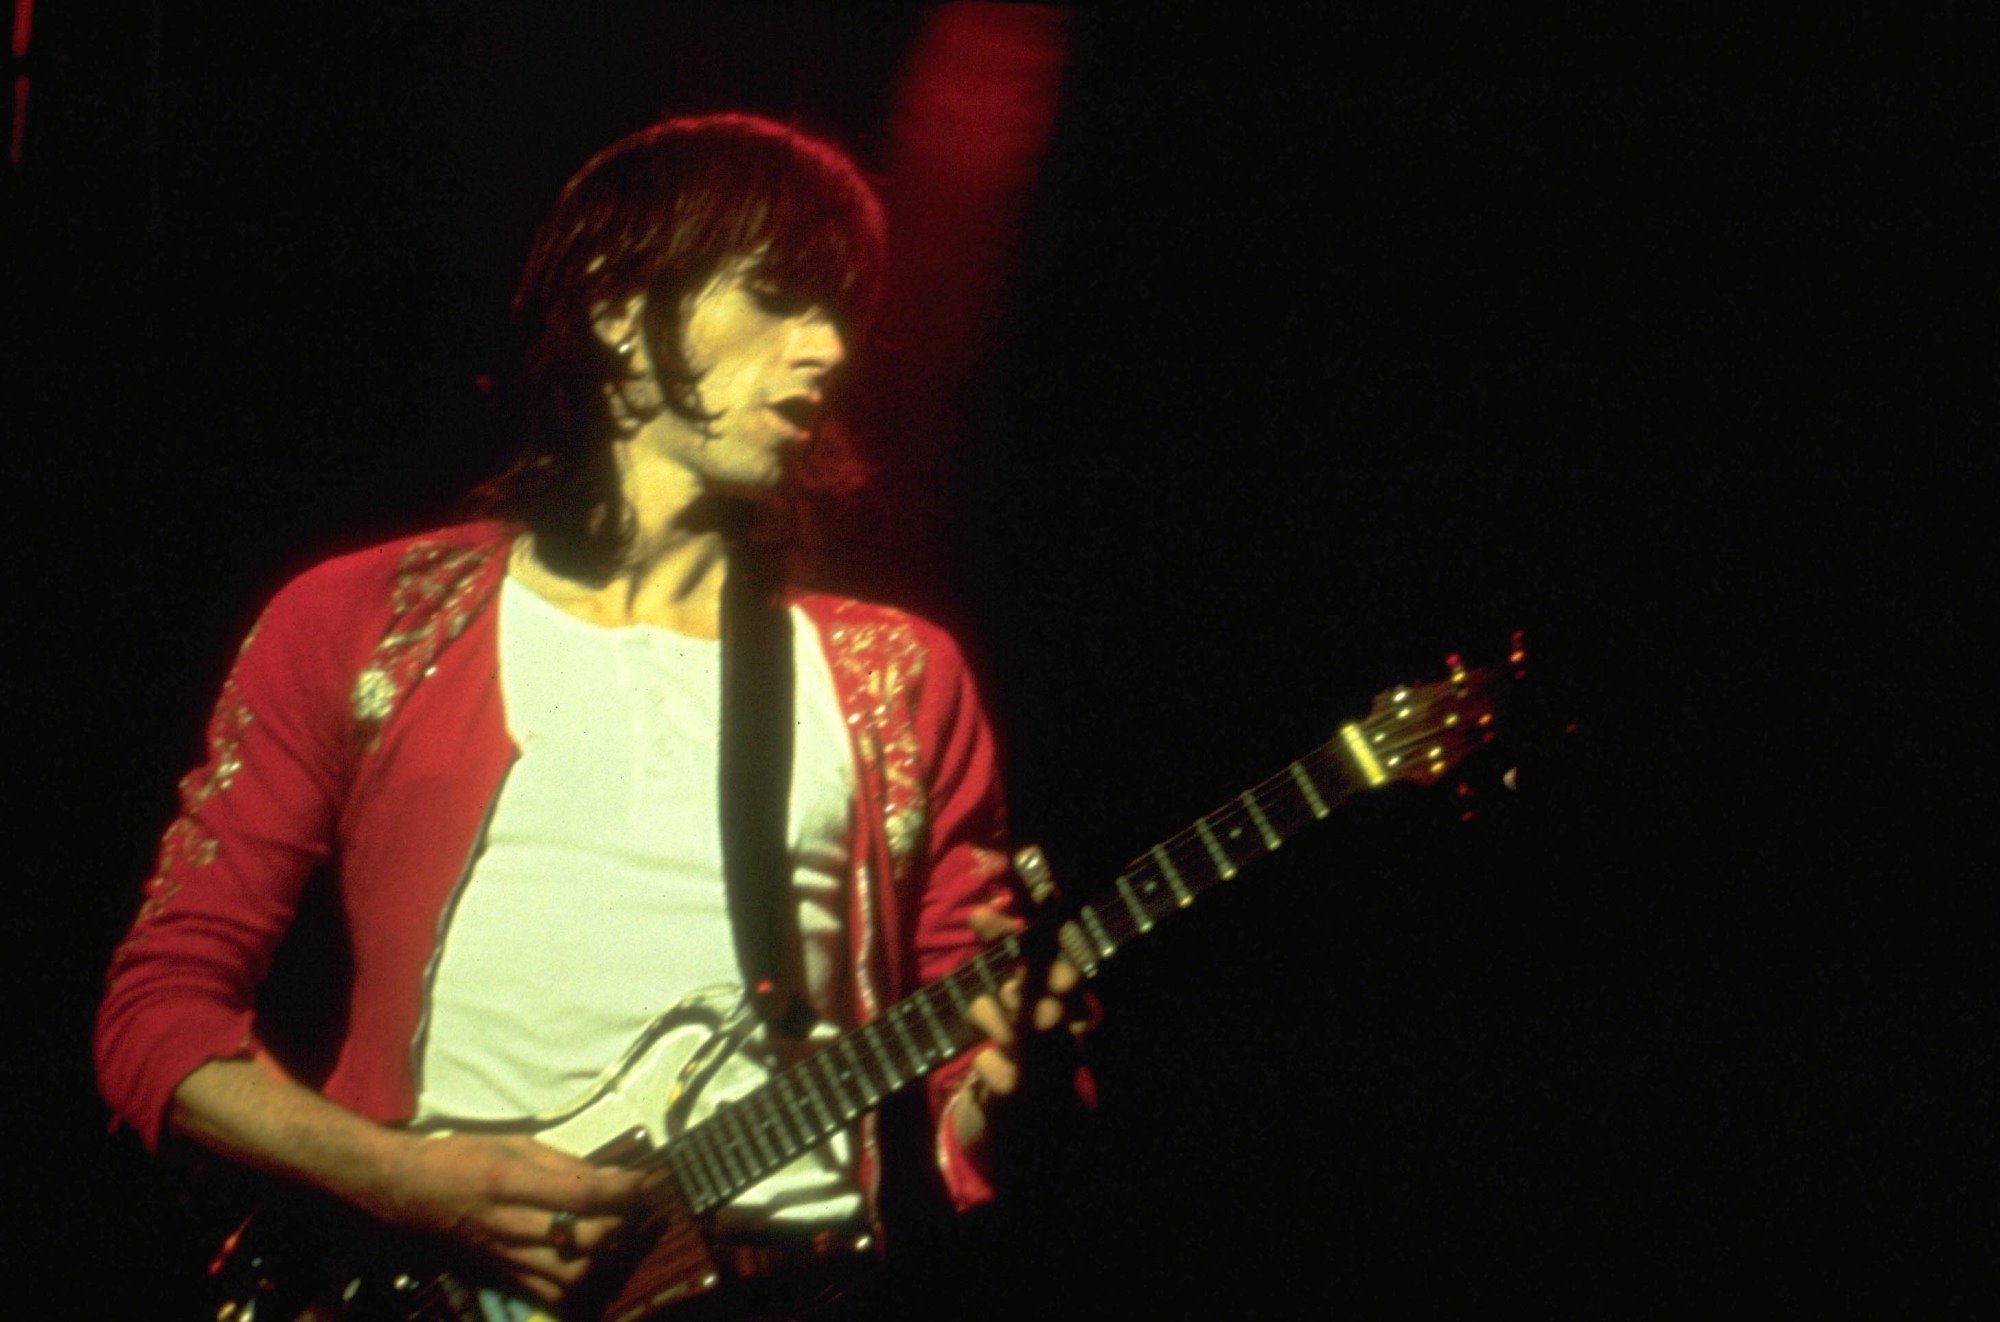 Keith Richards playing guitar onstage at a Rolling Stones concert.